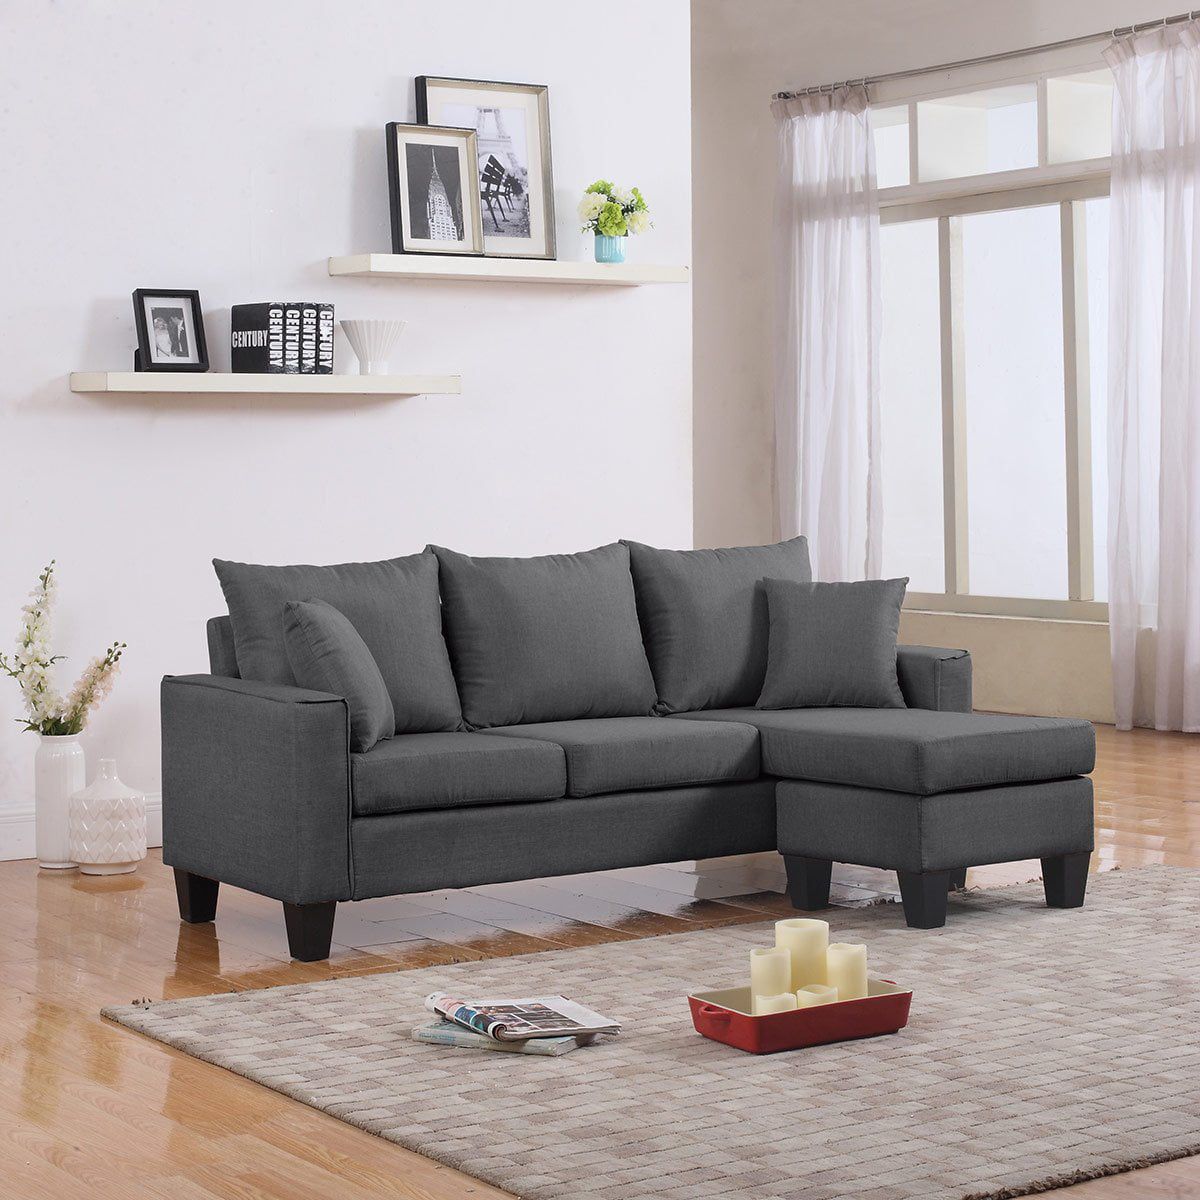 Modern Linen Fabric Small Space Sectional Sofa With Reversible Chaise Regarding Gray Linen Sofas (View 15 of 20)